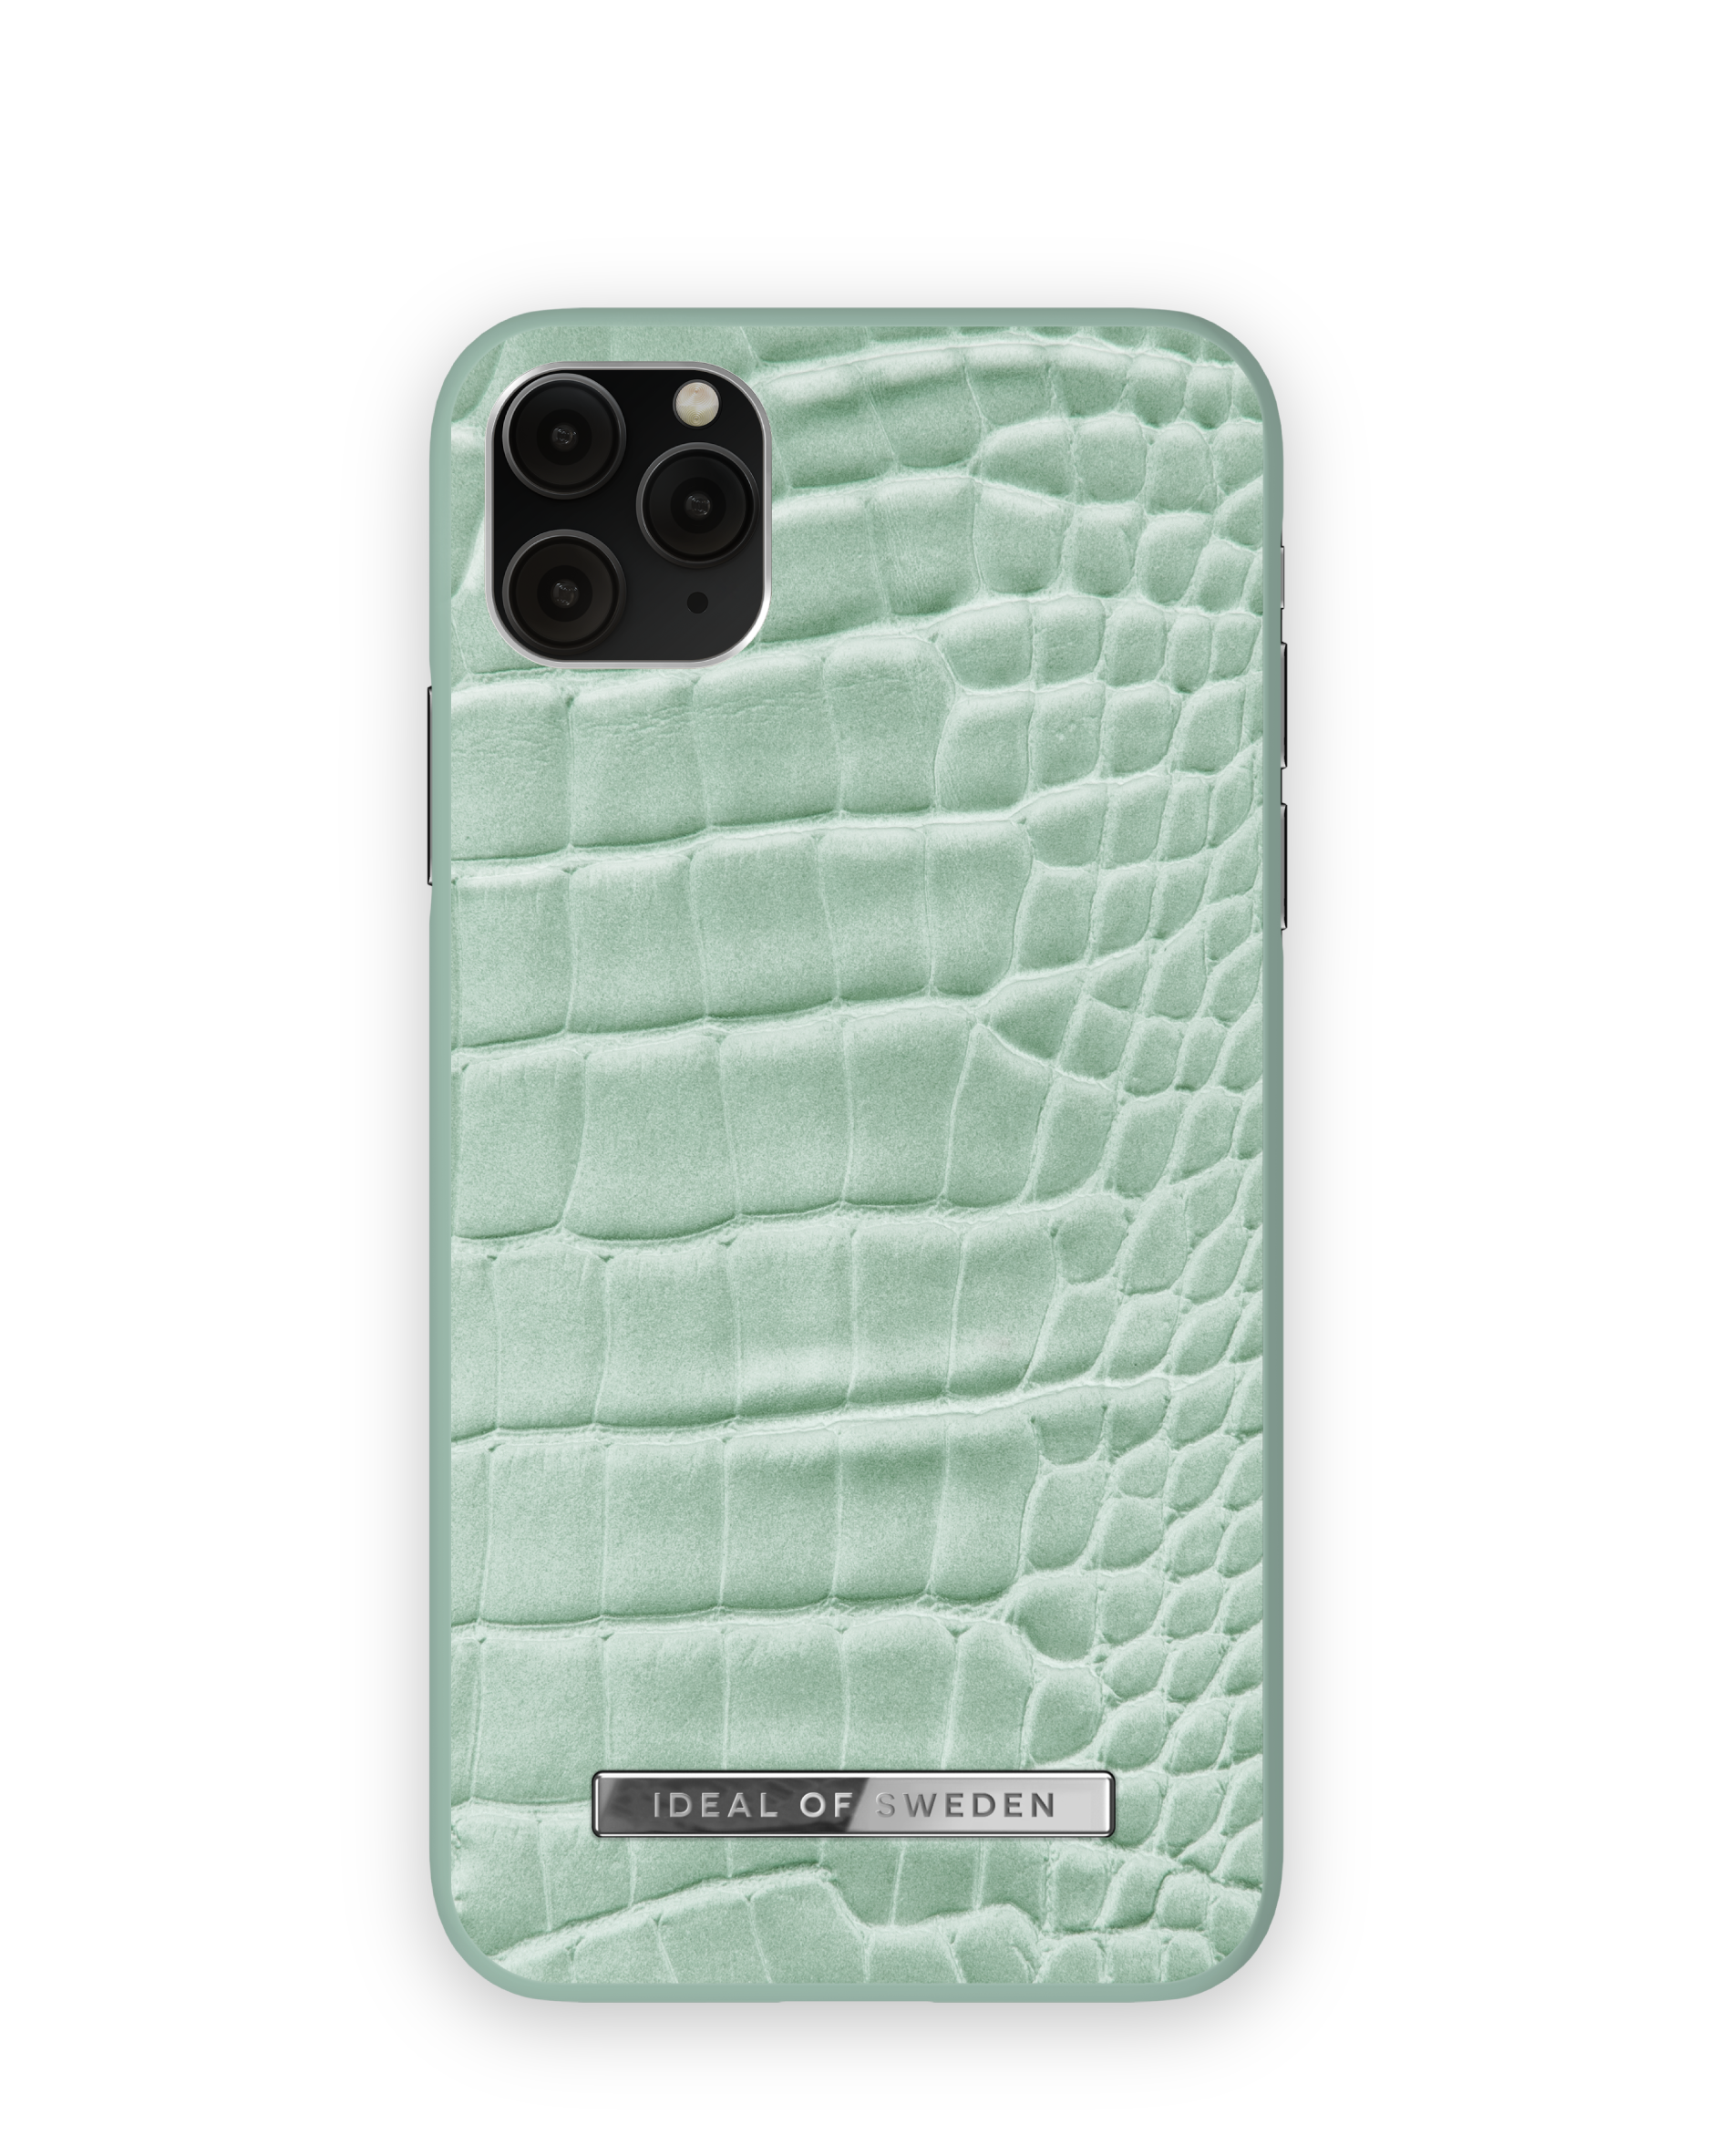 OF Apple Apple IDPWSS21-I1965-261, iPhone IDEAL Max, Bookcover, Max, 11 XS Pro Croco SWEDEN Mint iPhone Apple,